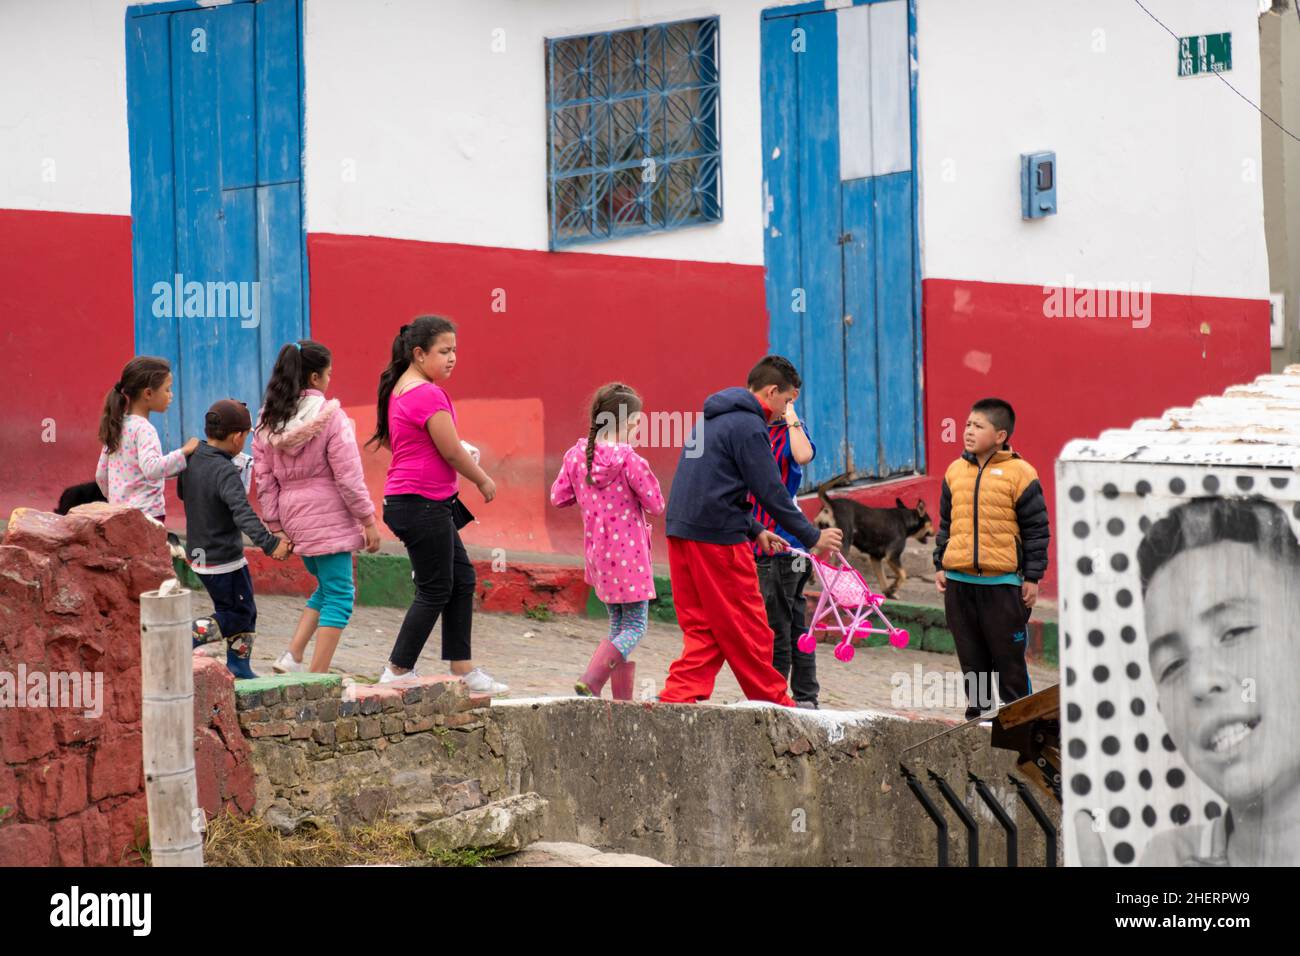 Children on the street in the once notorious gang Barrio Egipto neighborhood, Bogota, Colombia, South America Stock Photo